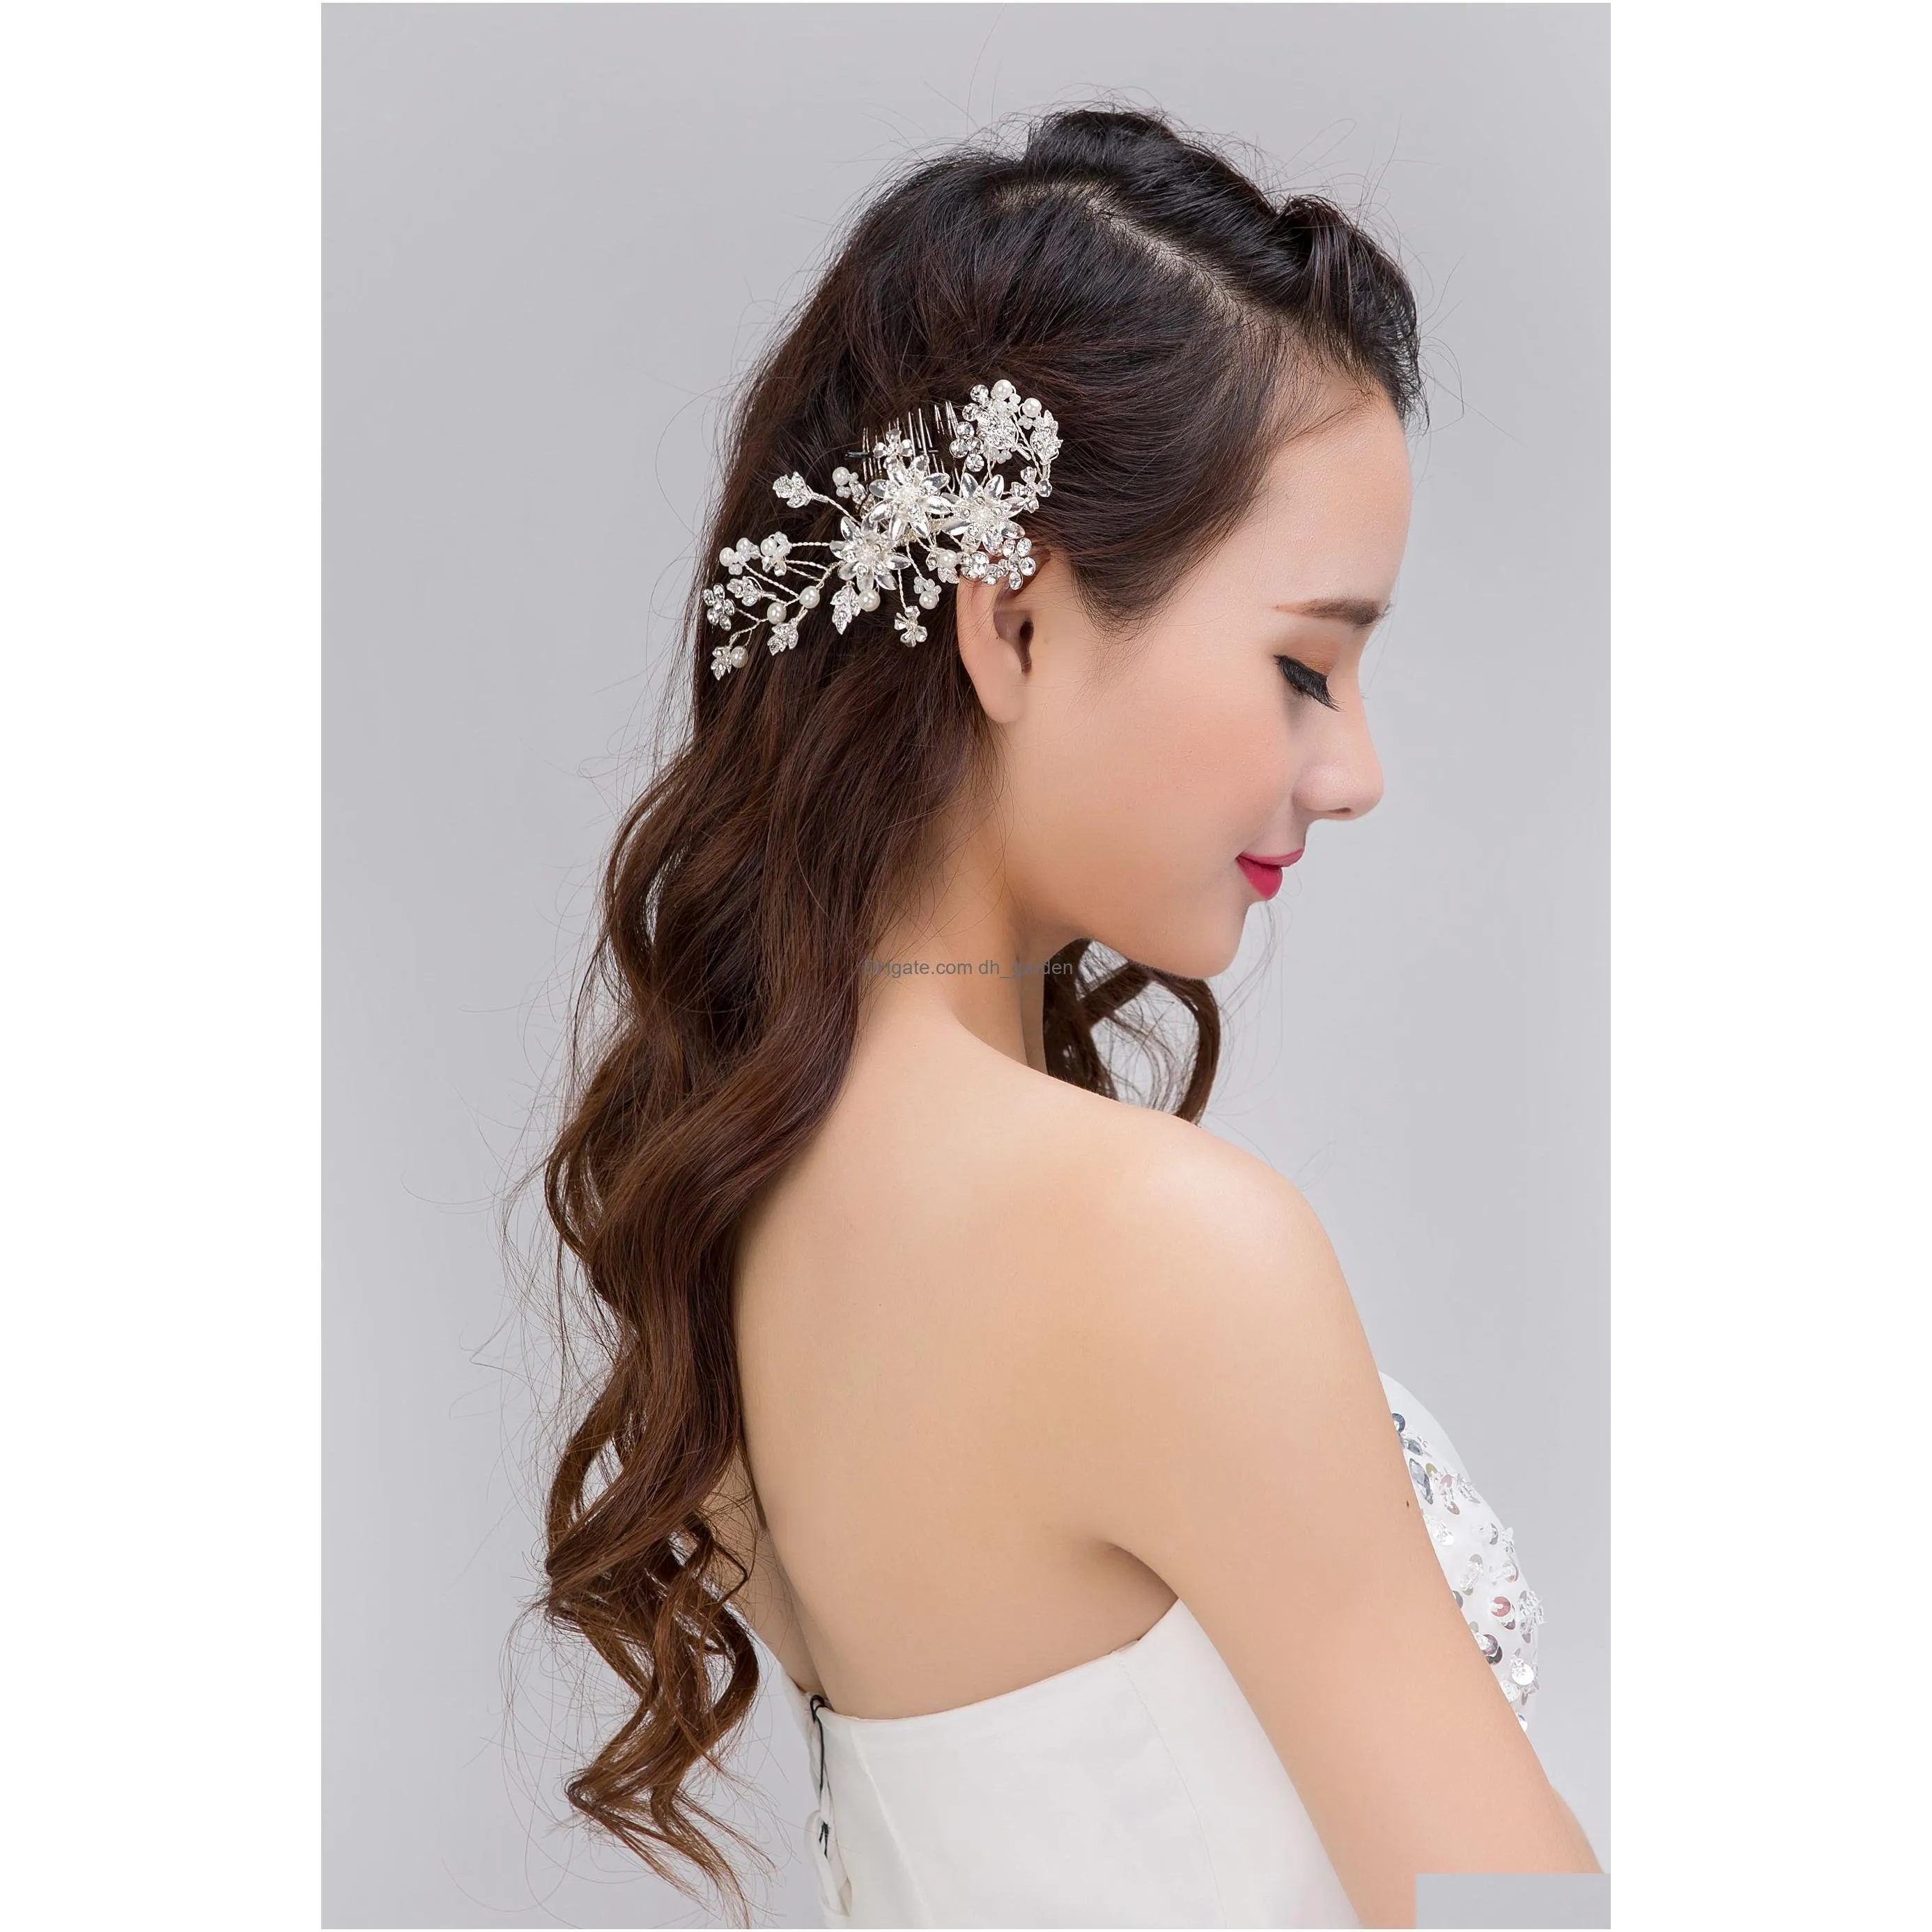 Simulated Pearl Handmade Hair Comb Headpiece with Copper Wire and Alloy Flower Style Bridal Wedding Jewelry Gifts